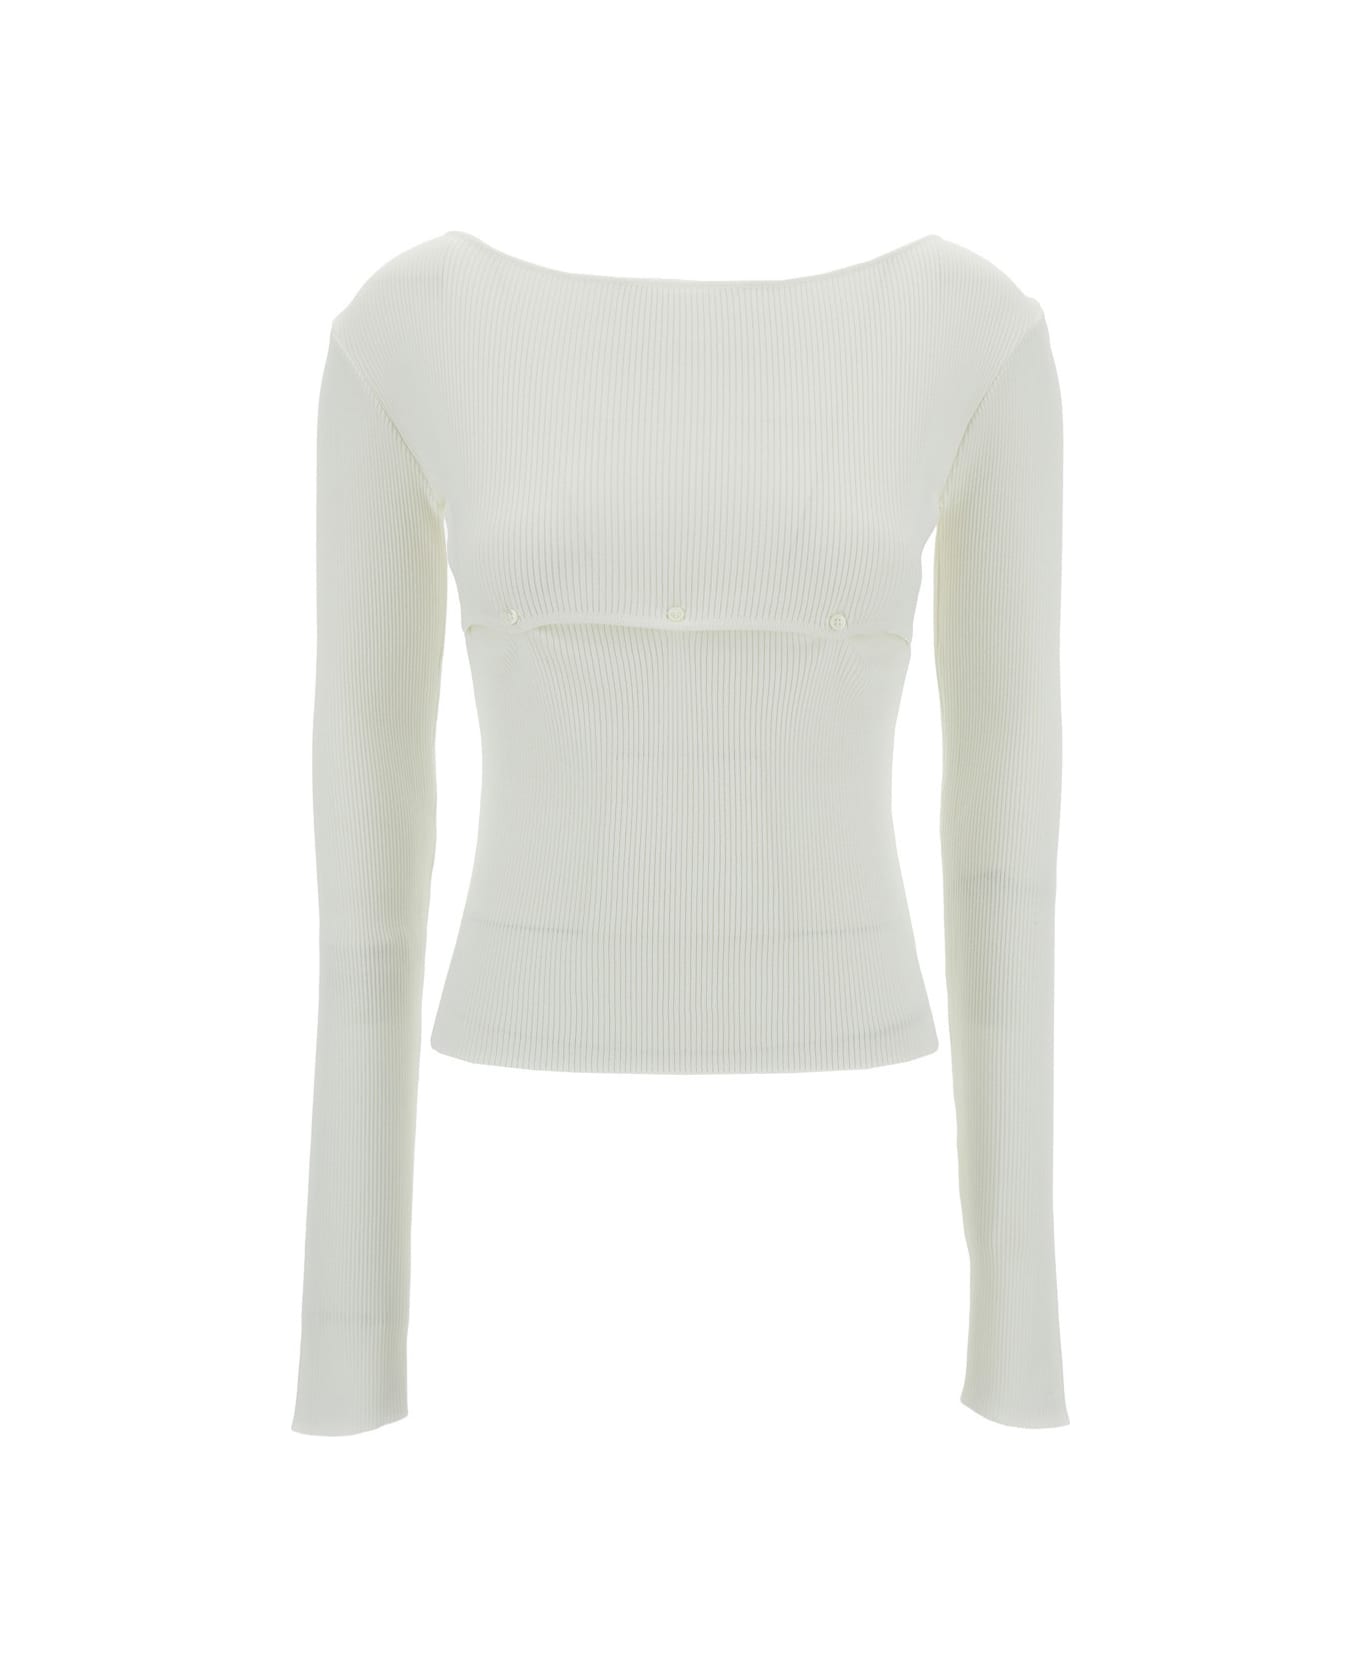 Low Classic White Ribbed Top With Boat Neckline And Buttons In Rayon Blend Woman - White ニットウェア